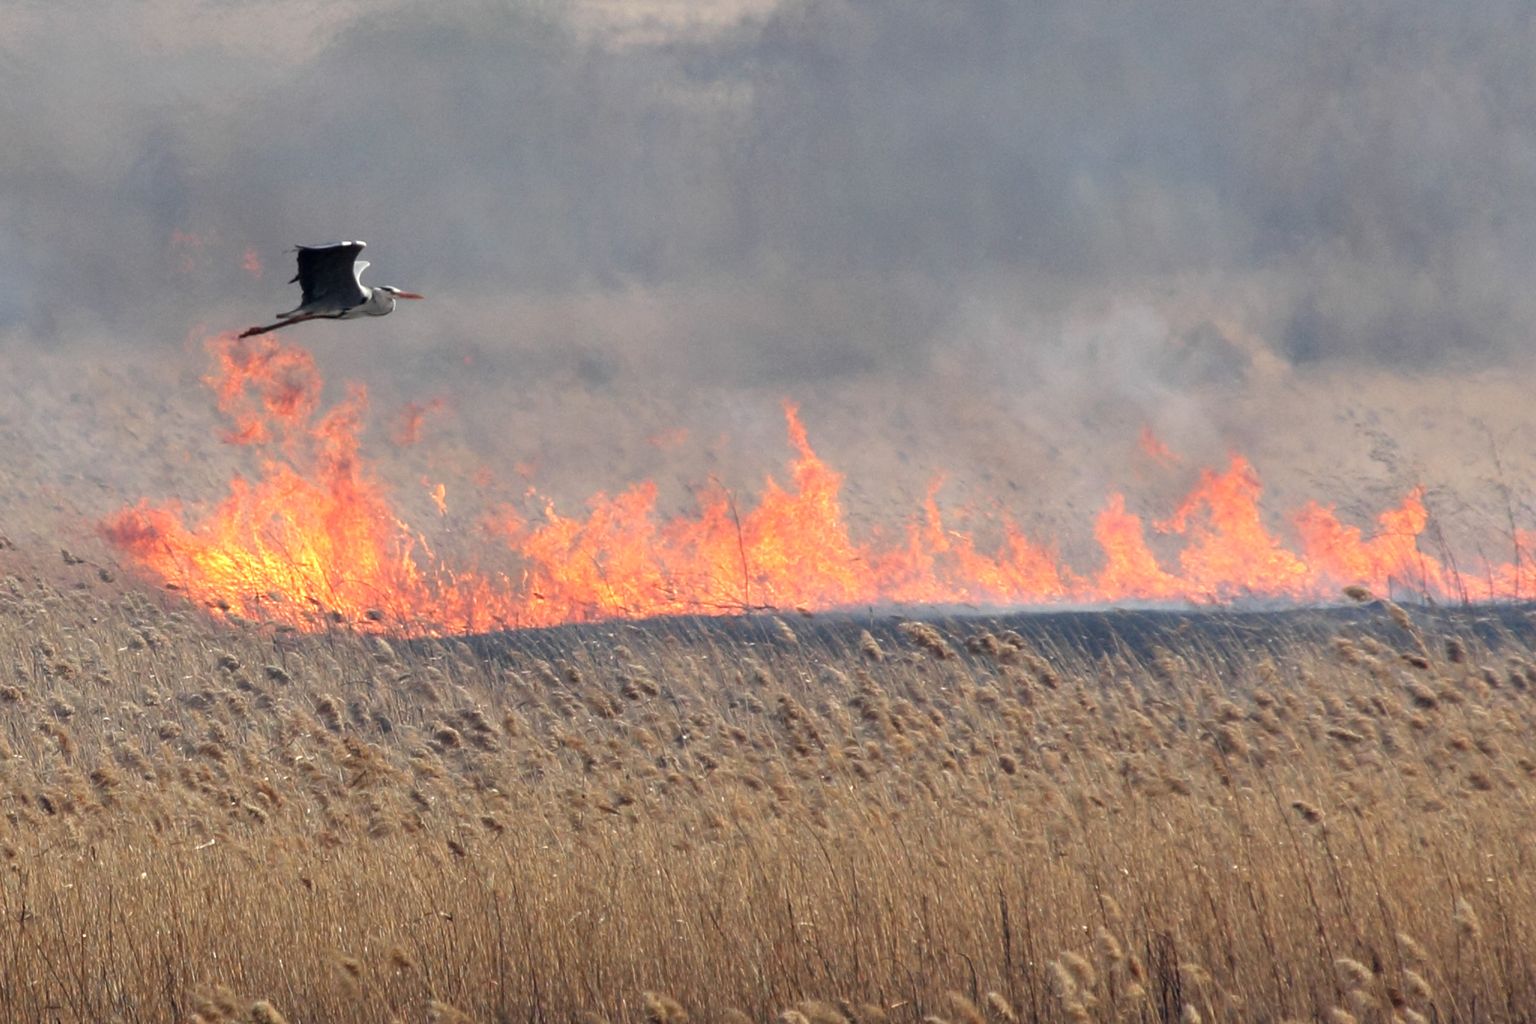 ITAR-TASS: KURGAN REGION, RUSSIA. APRIL 19, 2012. A bird flies over burning dry grass in Kurgan Region, Urals Fedral District. The regional authorities have warned people against making bonfires in forests and setting dry grass on fire in the fields in connection with a high risk of wildfires. (Photo ITAR-TASS / Alexander Alpatkin)